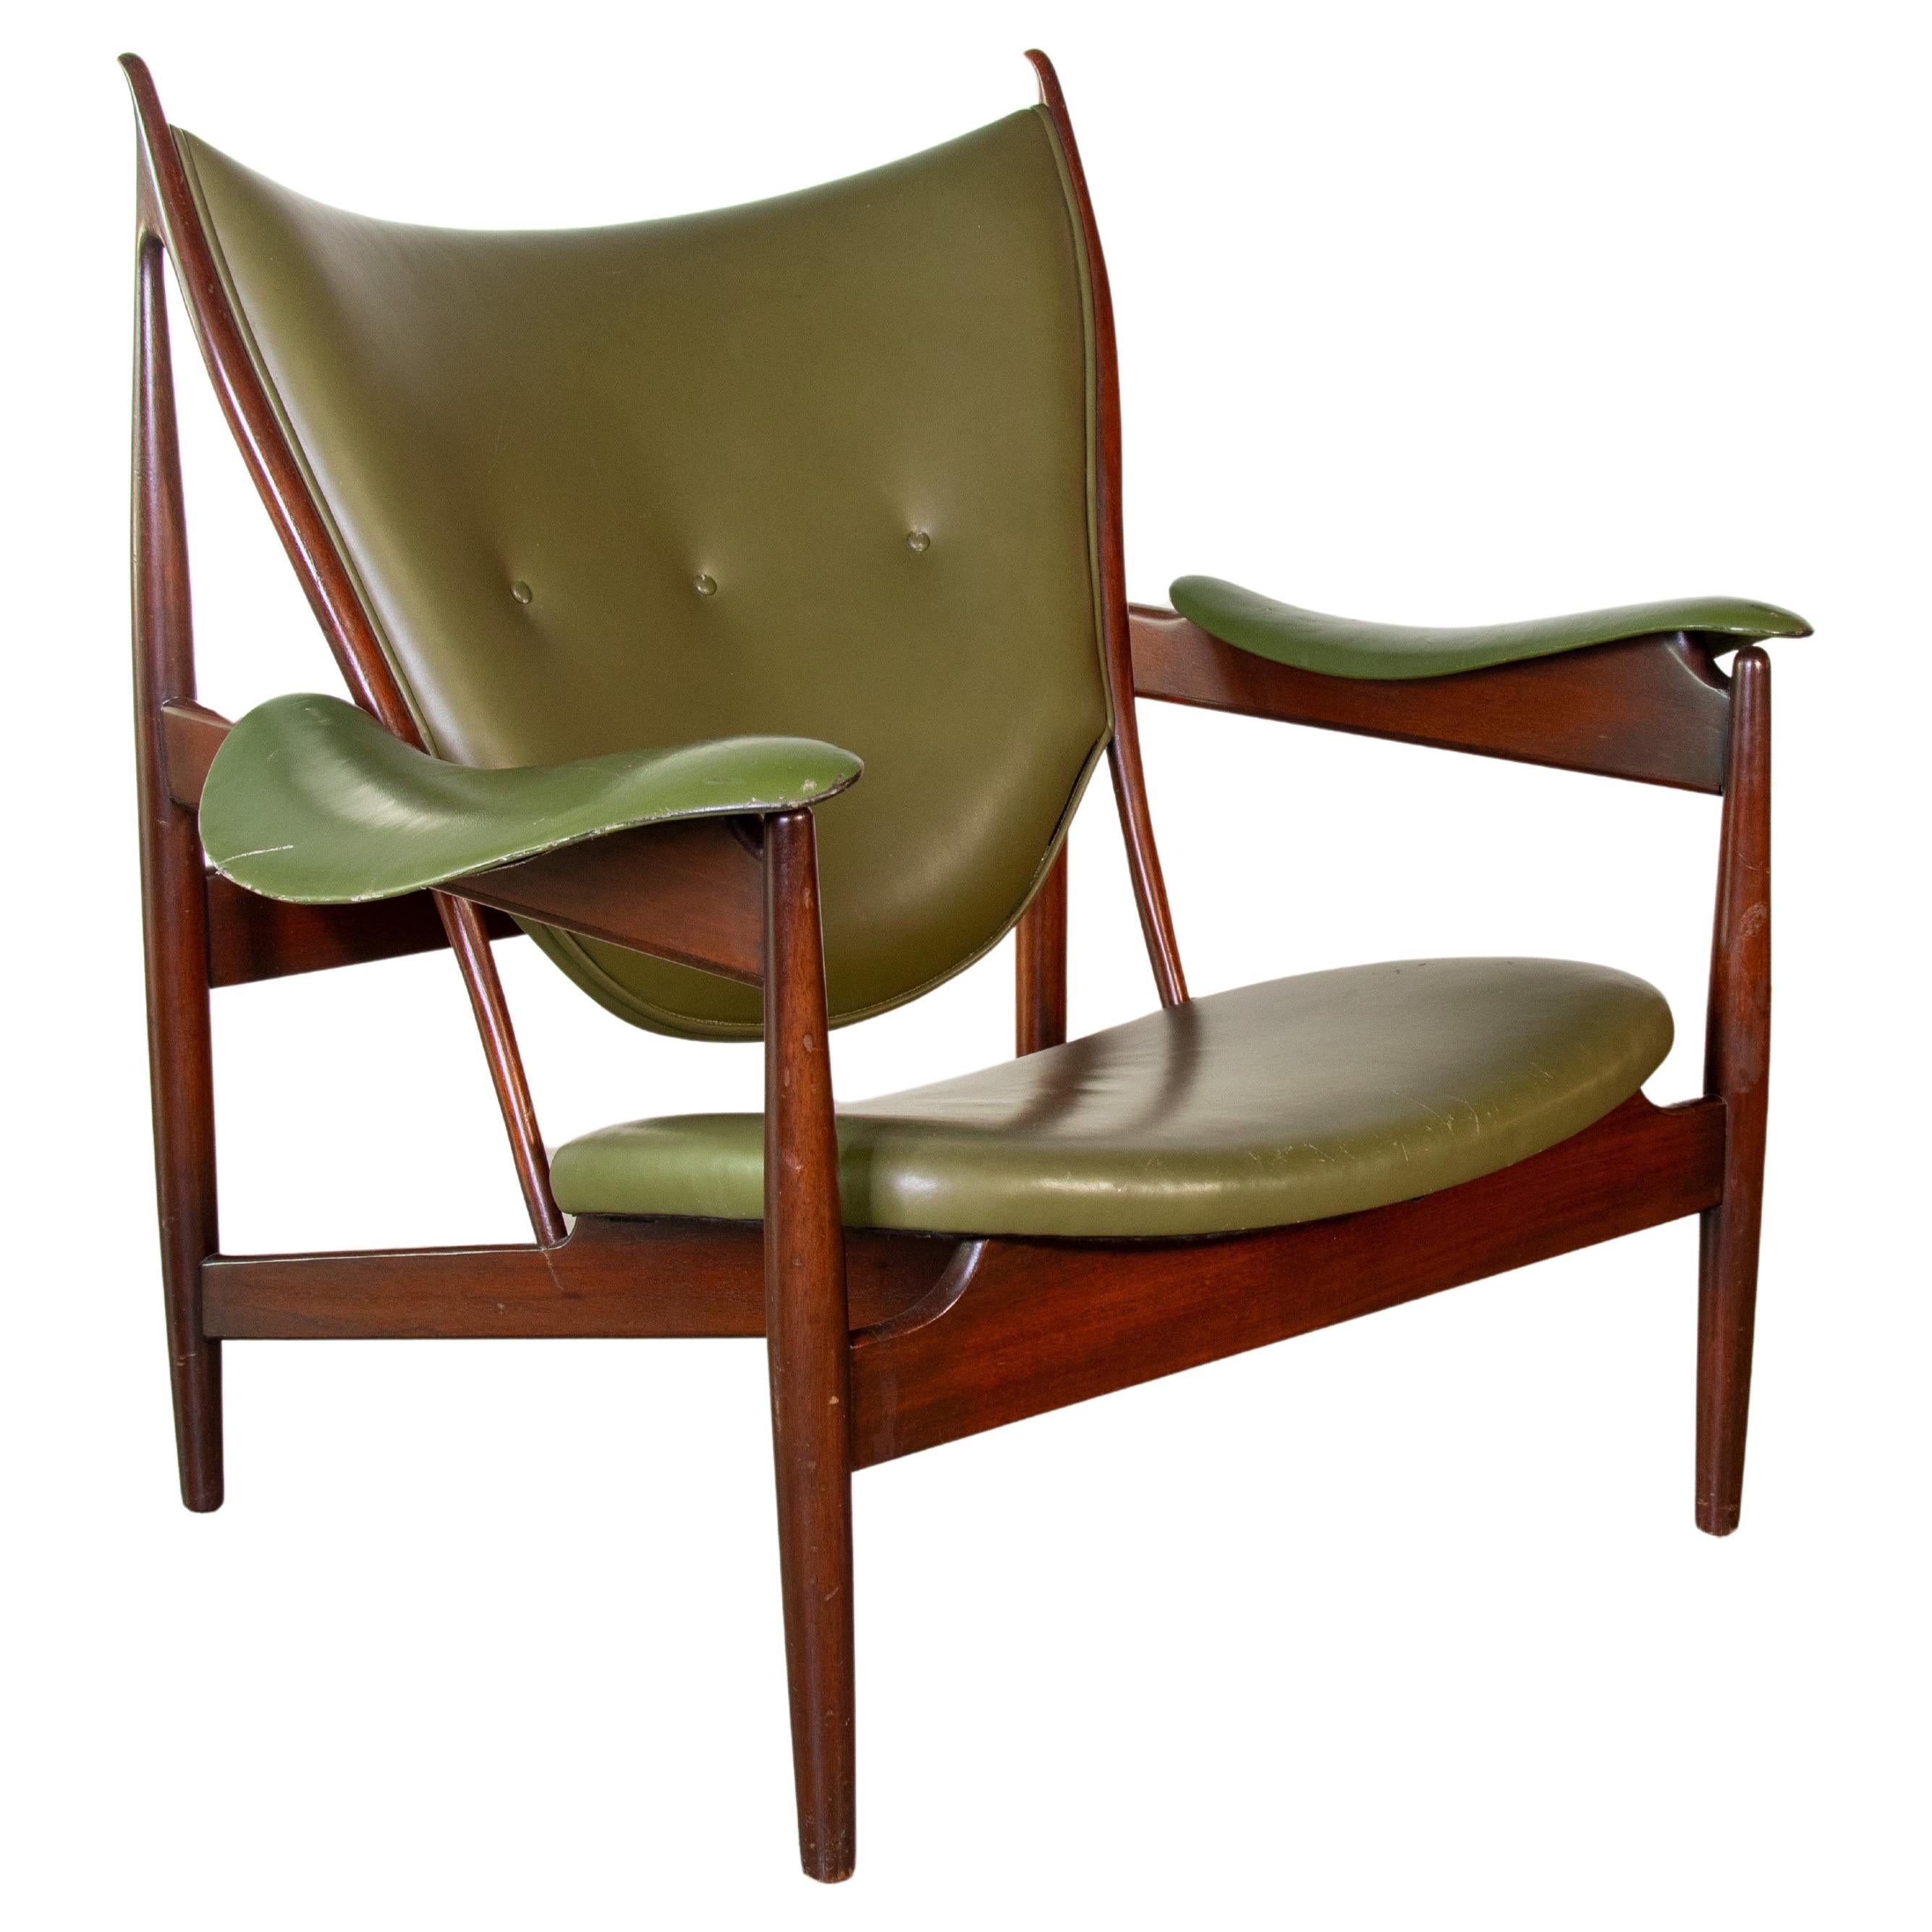 Interior Crafts Chieftain Chair for "Structure" after Finn Juhl late 1990s